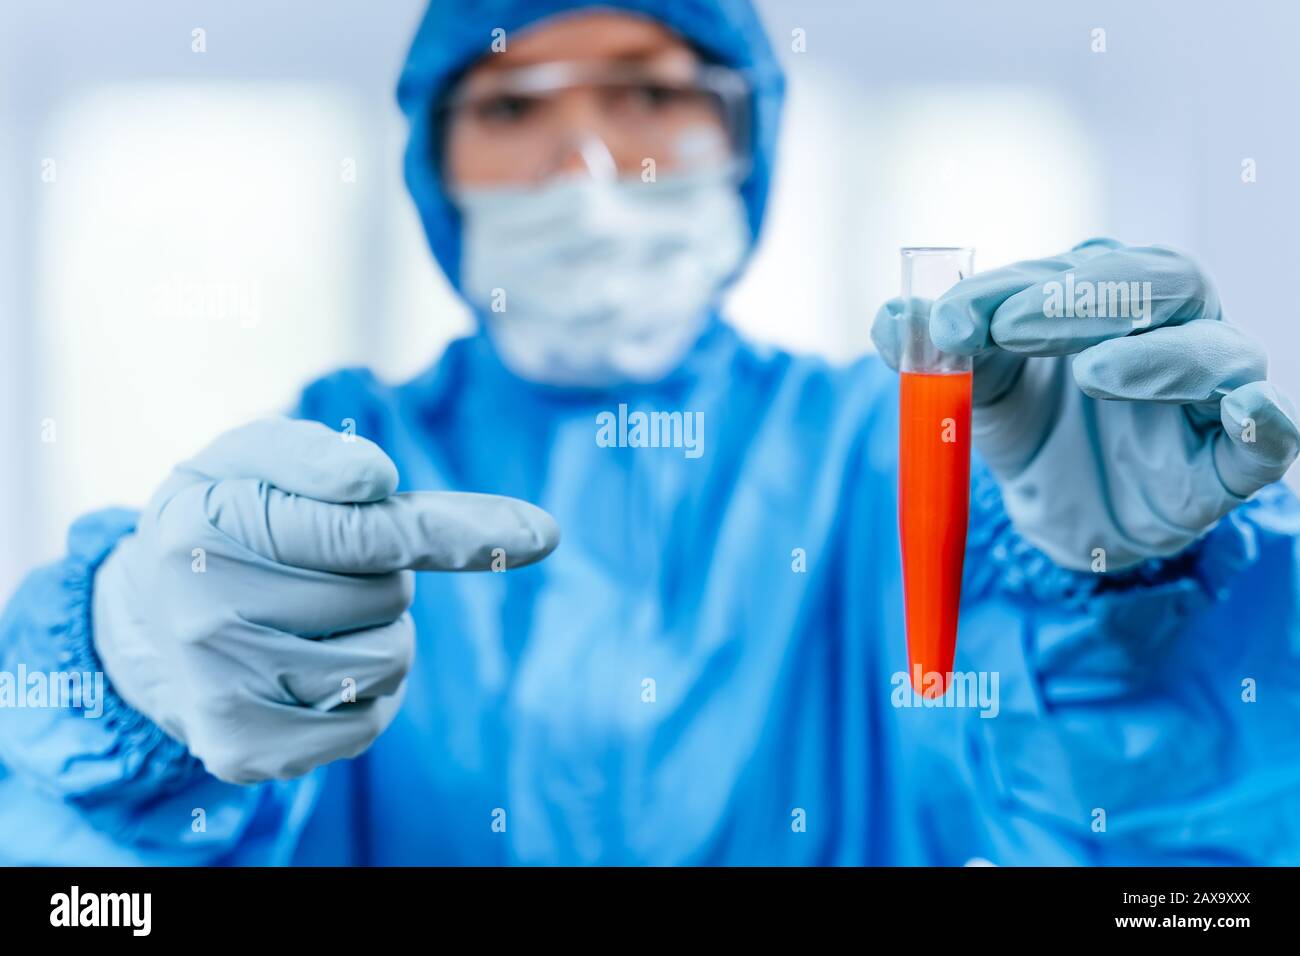 Medic in hazmat protective suit holds a test tube with a coronavirus positive blood sample from Wuhan, China. 2019 nCoV pandemic. stop coronavirus Stock Photo